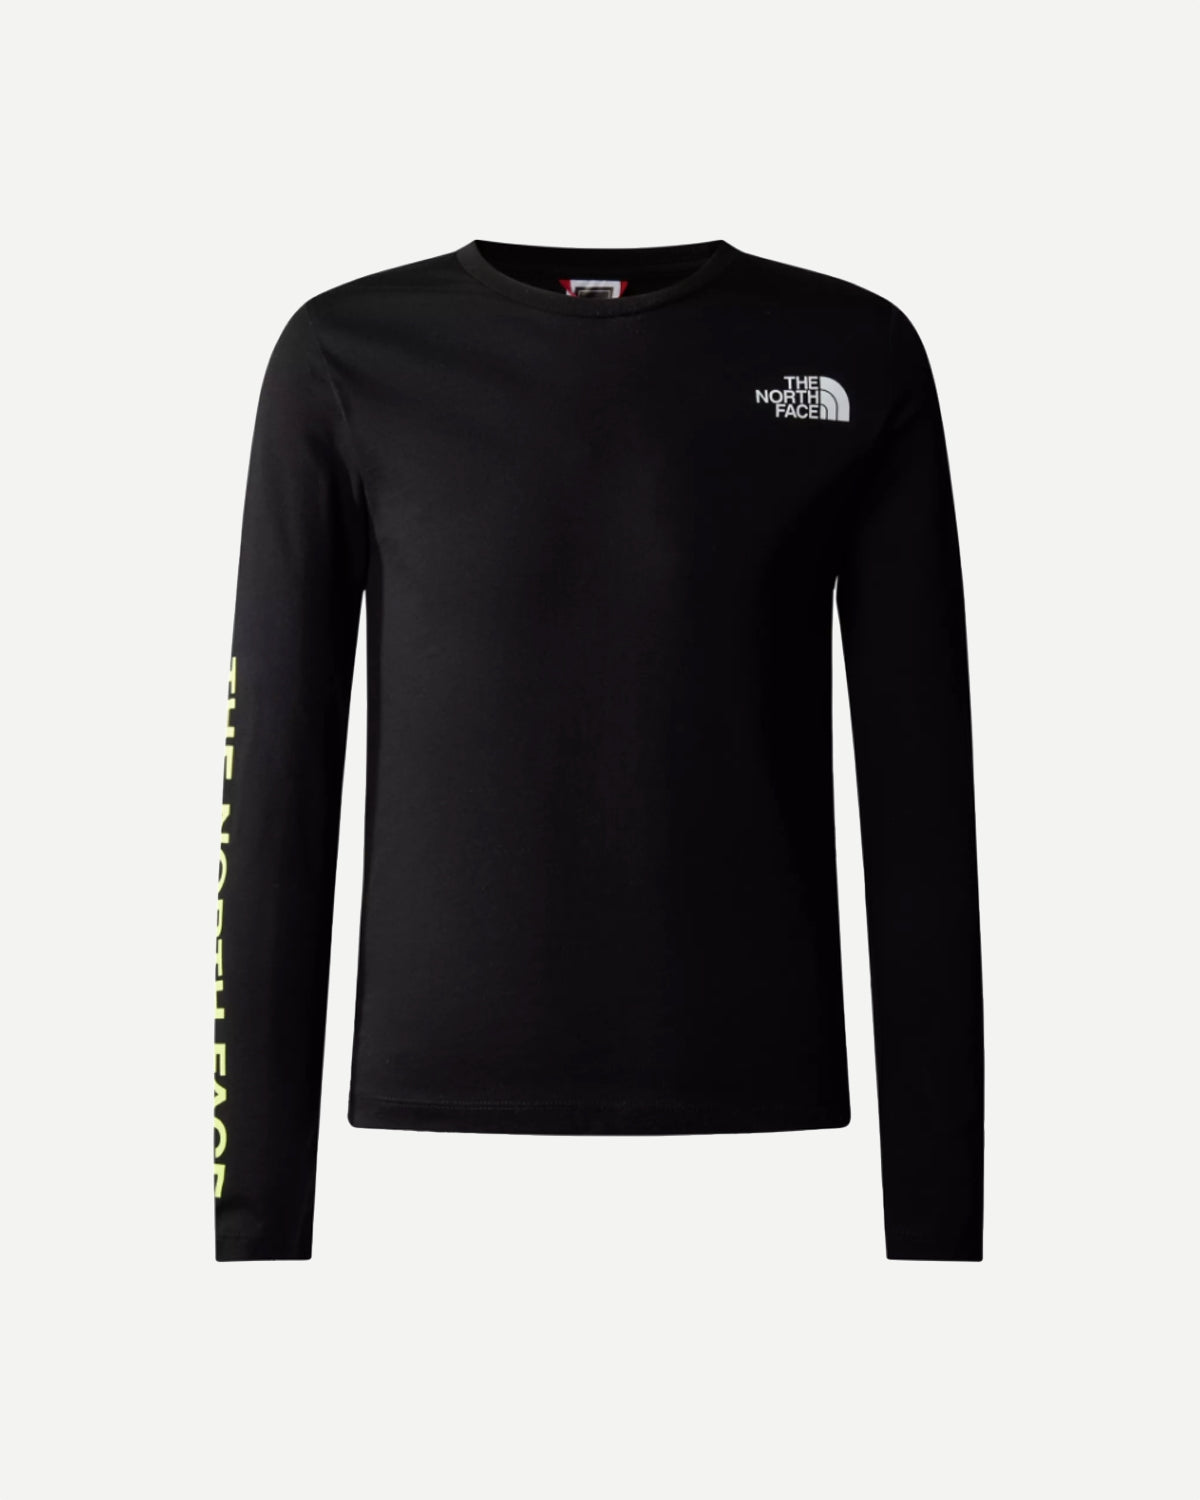 Teens L/S Graphic Tee - Black - The North Face - Munkstore.dk